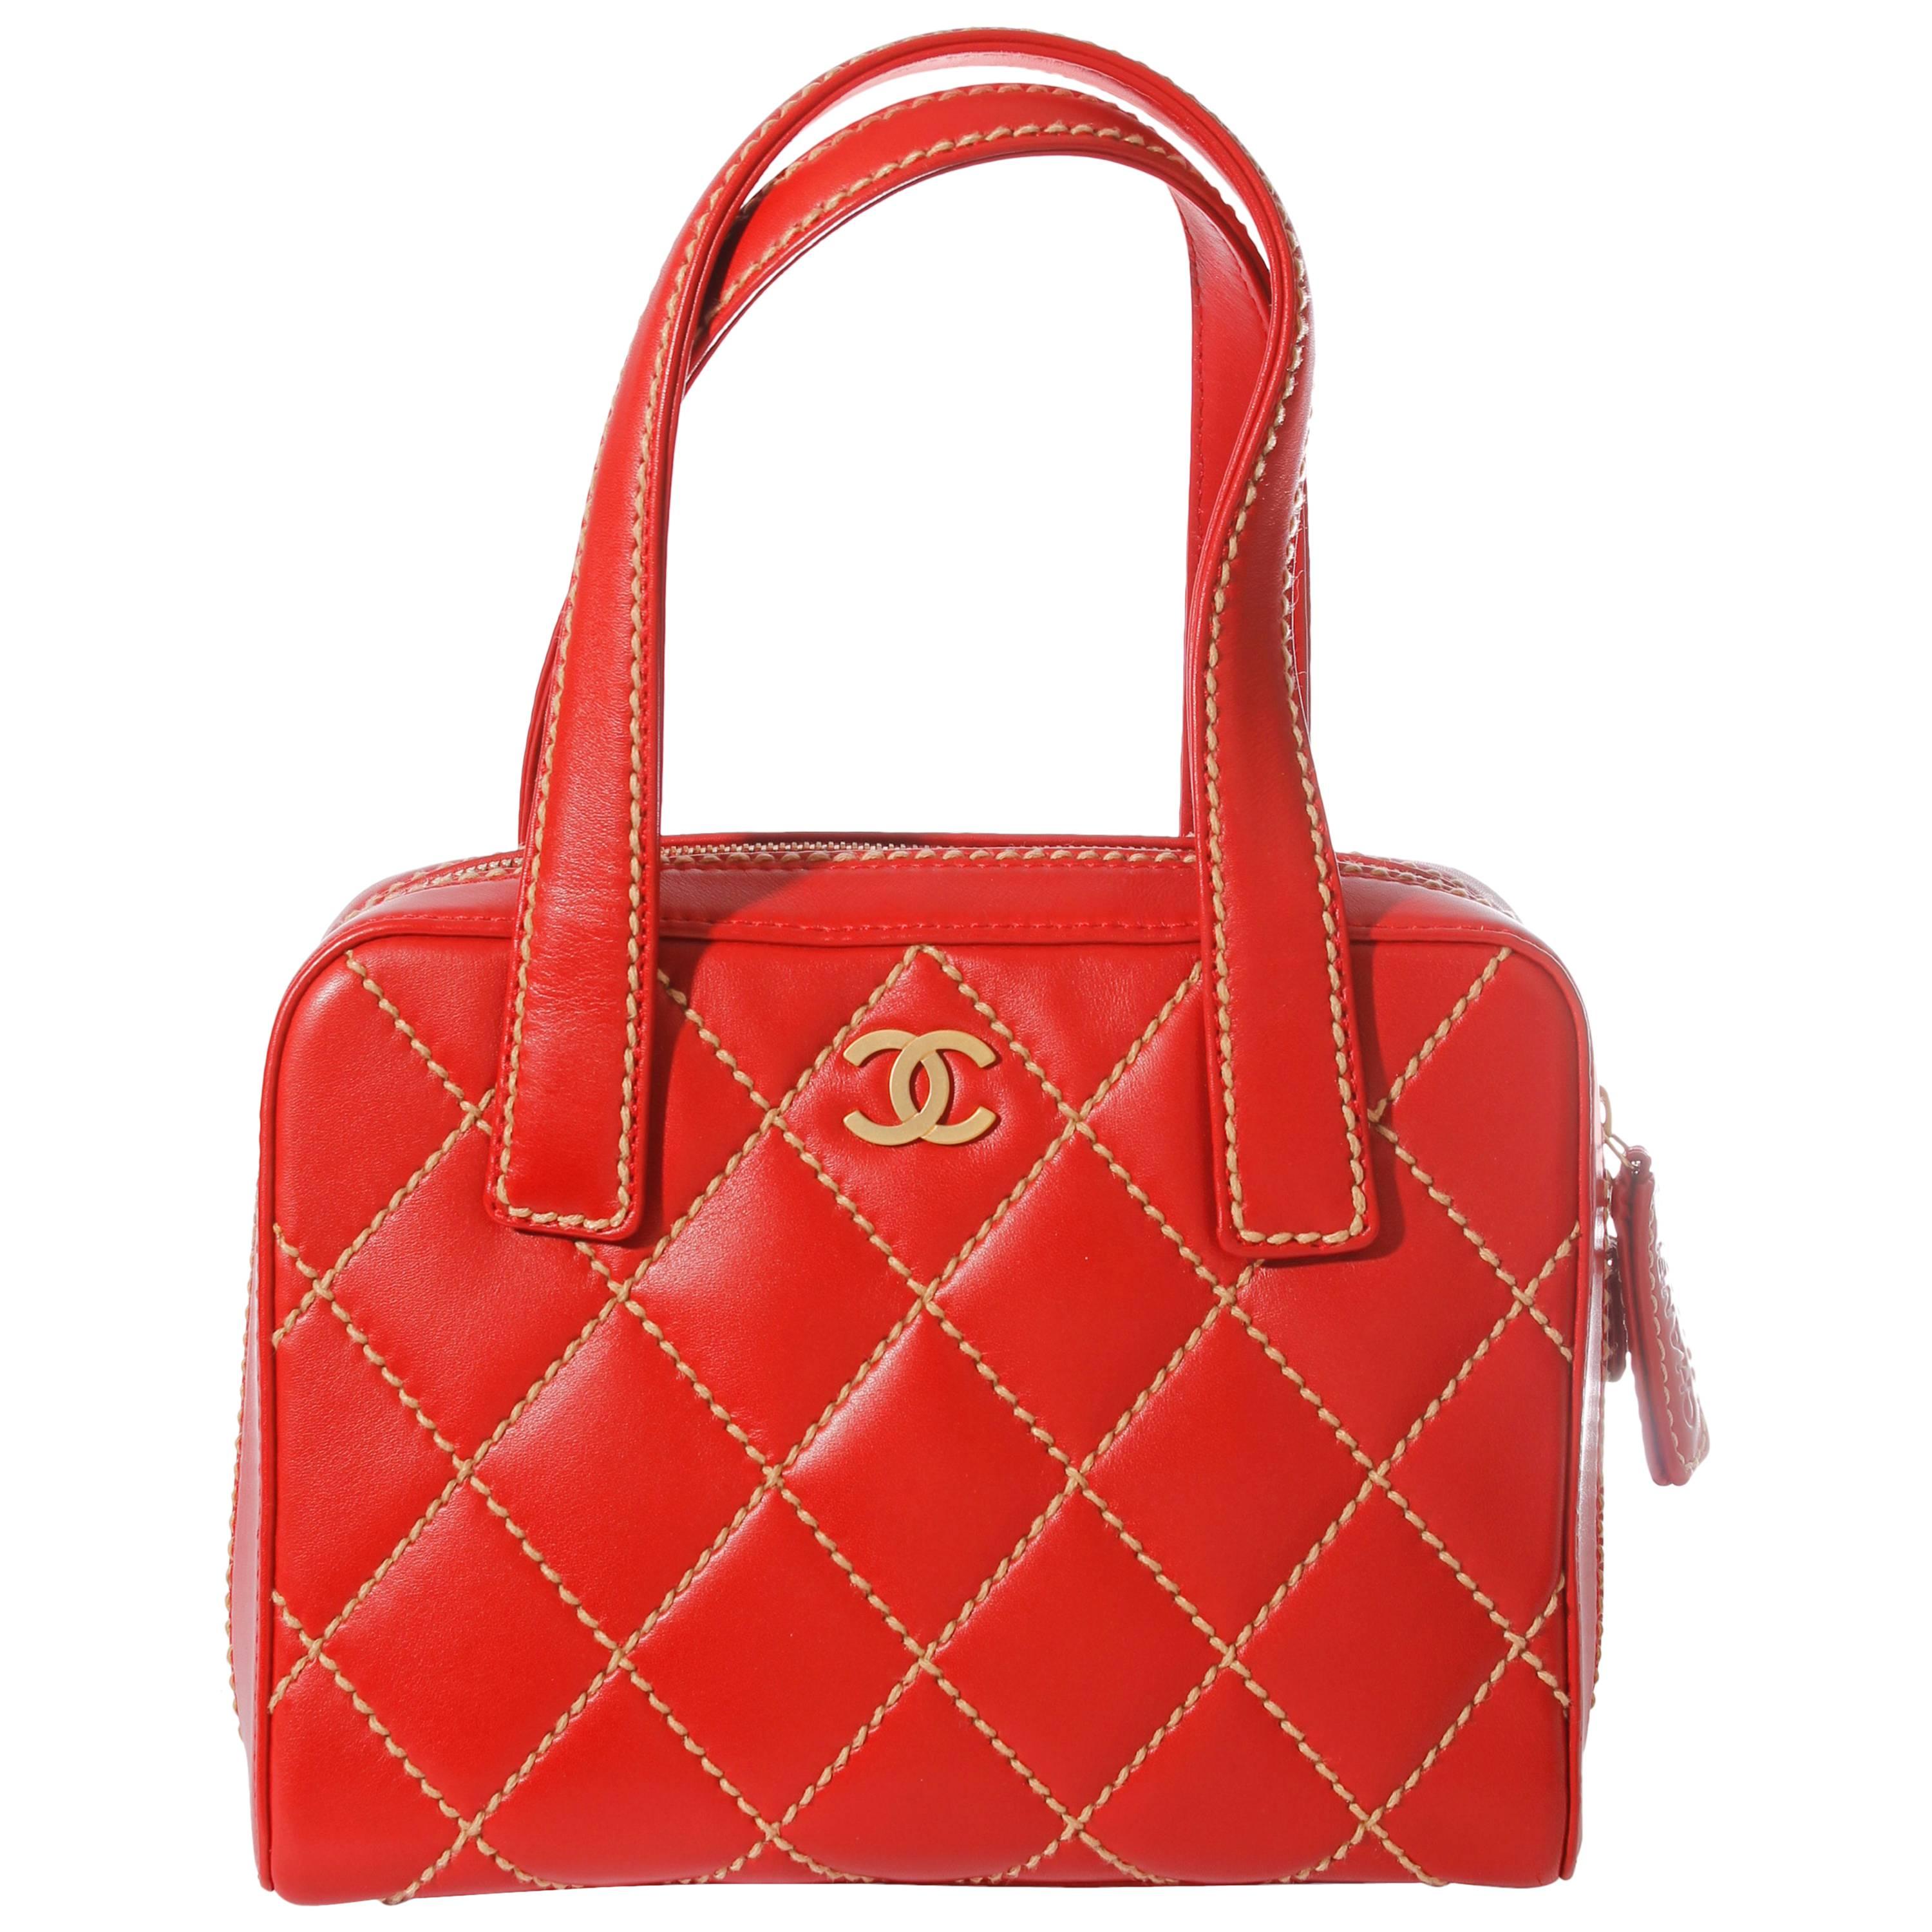 Chanel Wild Stitch Quilted Zip Tote Bag - red calf leather